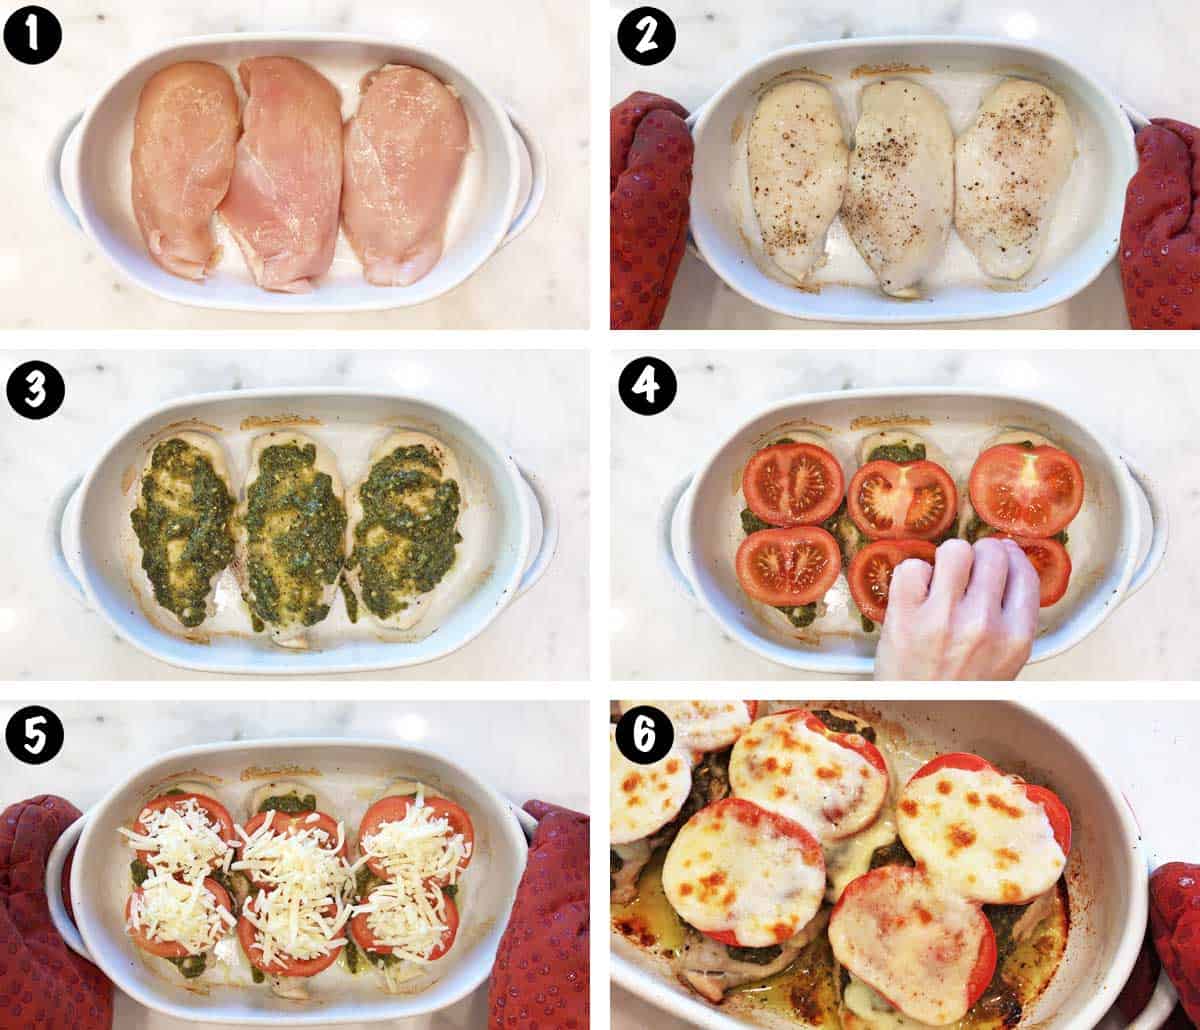 A photo collage showing the steps for making a pesto chicken bake.